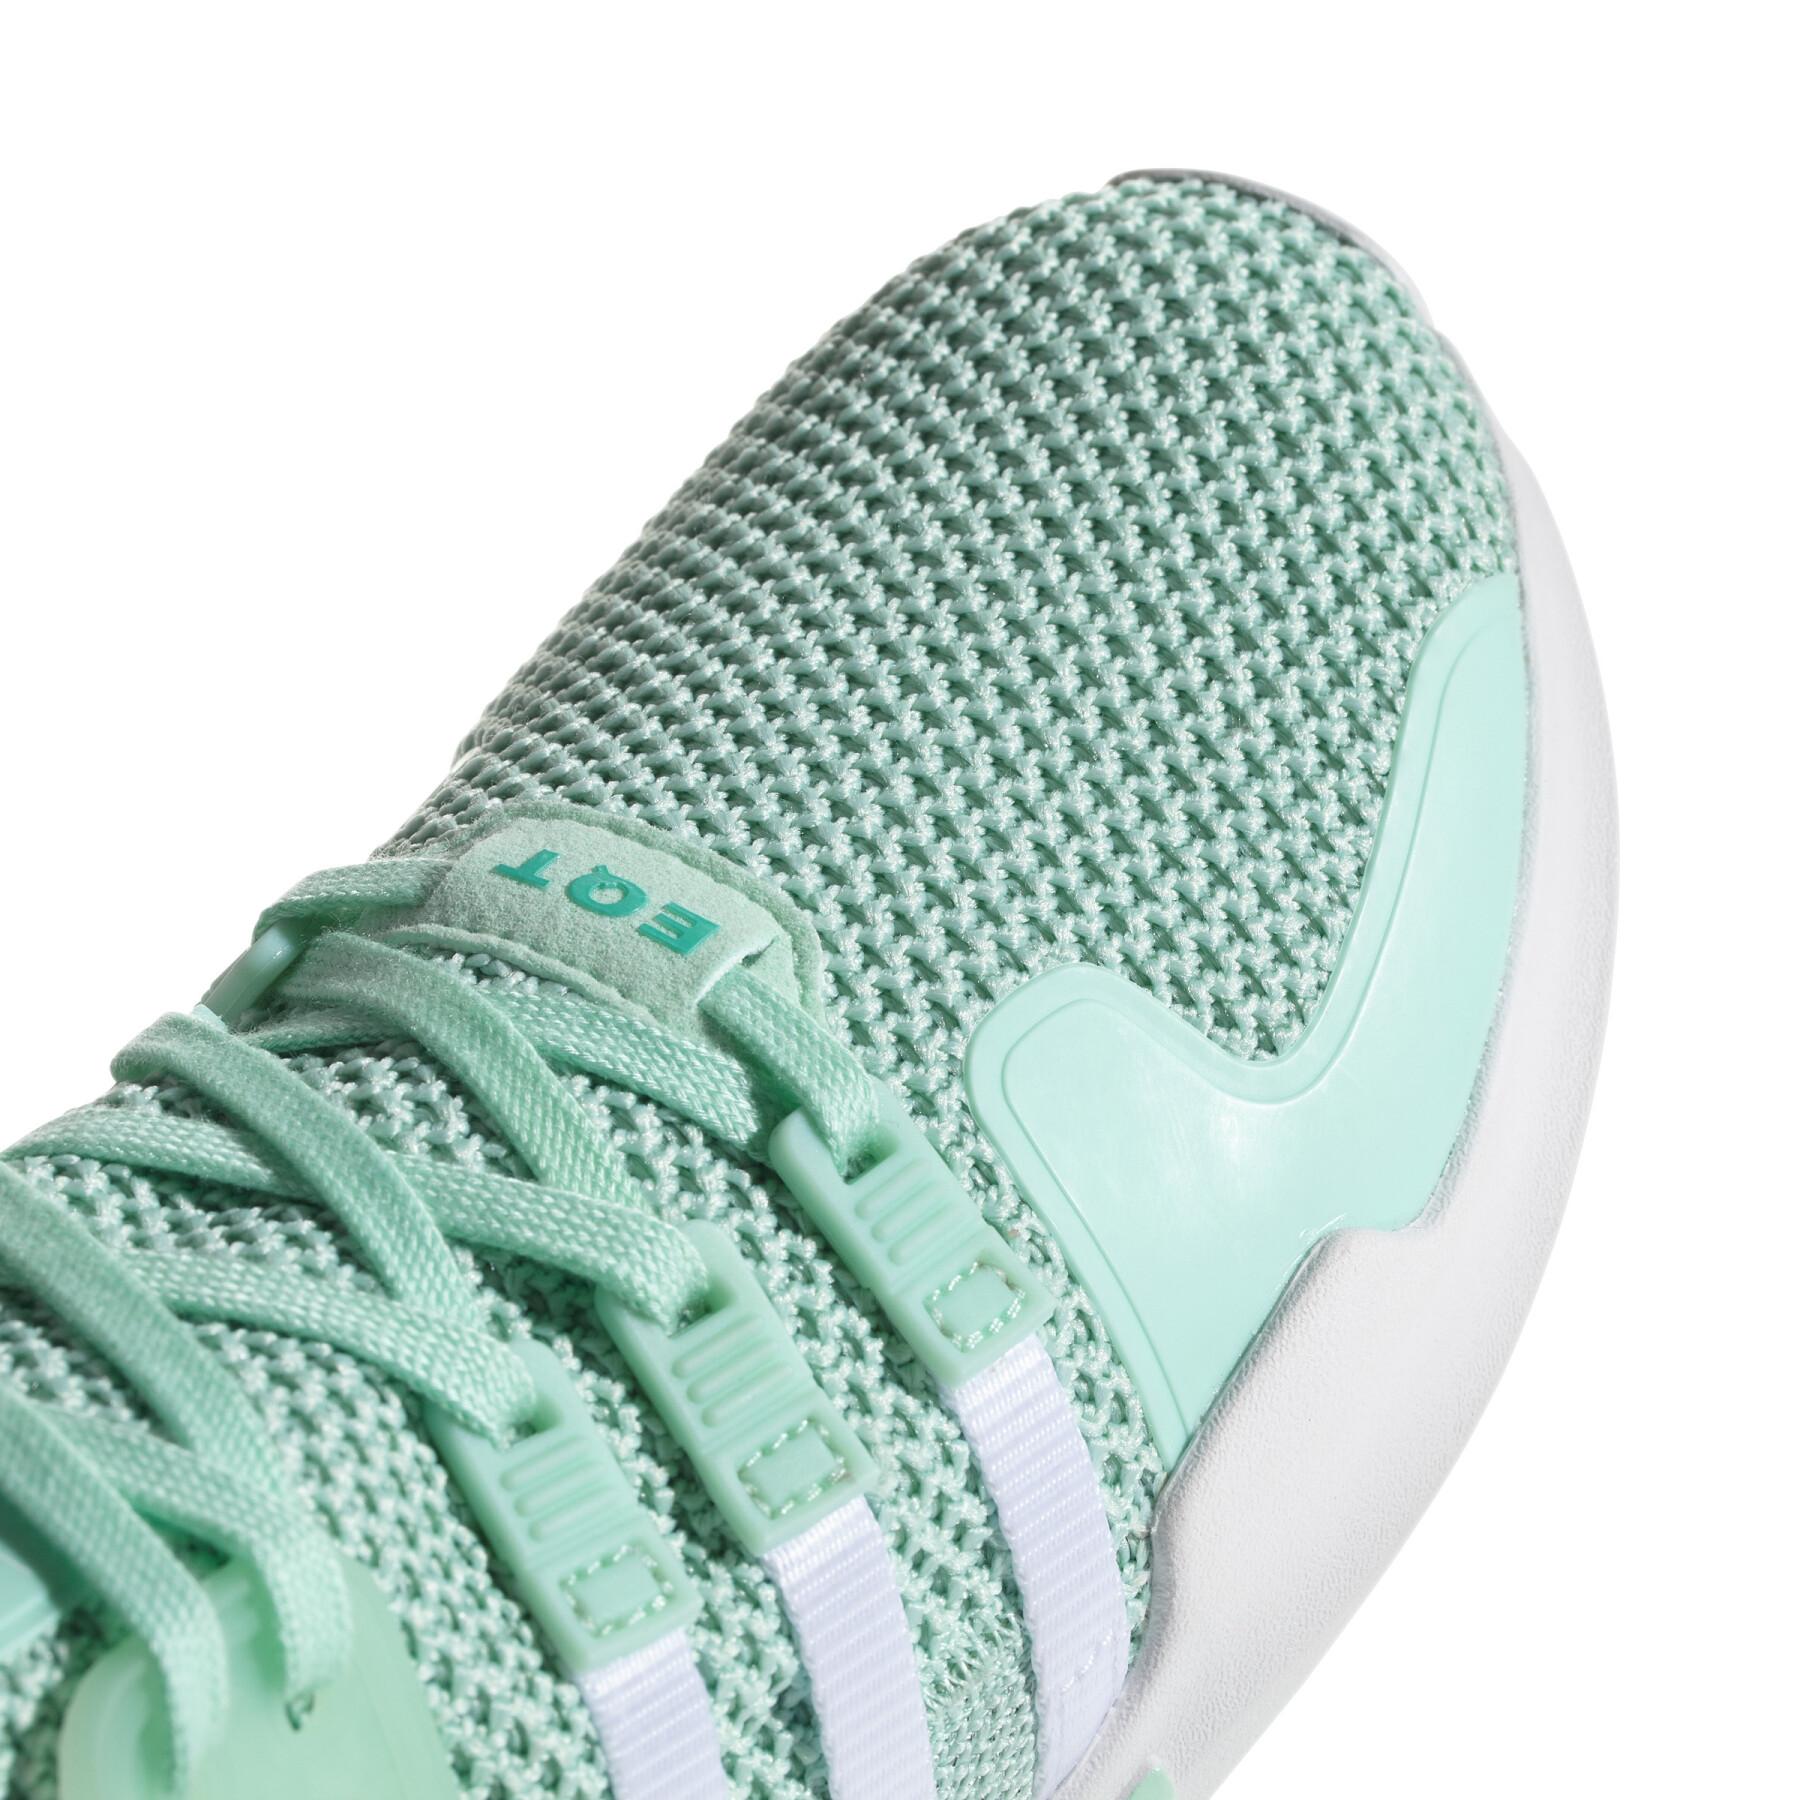 Women's sneakers adidas EQT Support ADV